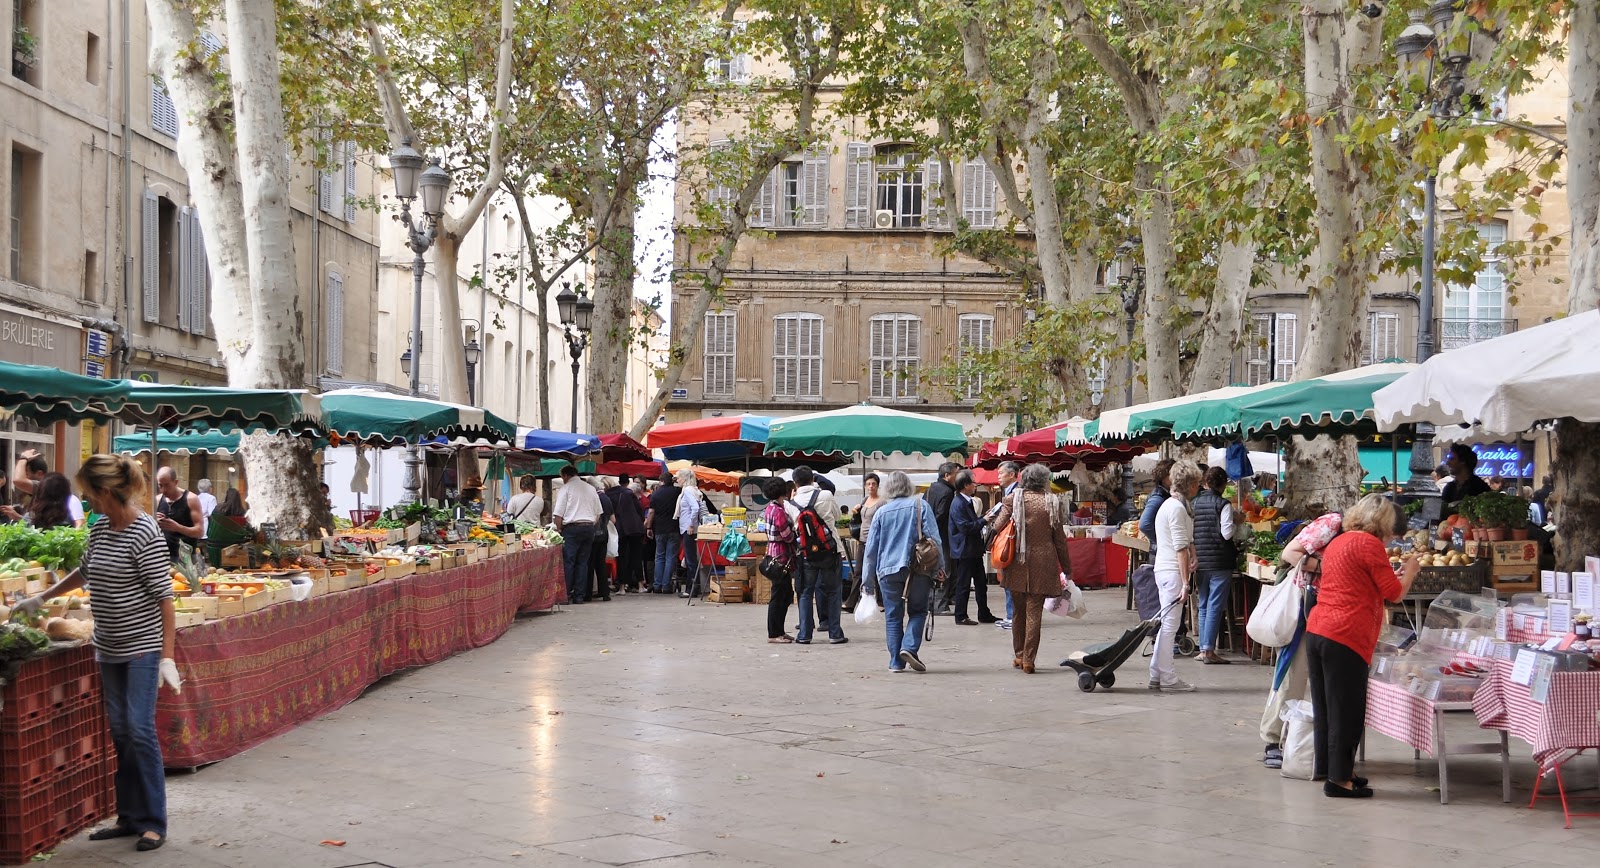 Our House in Provence: Every Day is Market Day in Aix-en-Provence